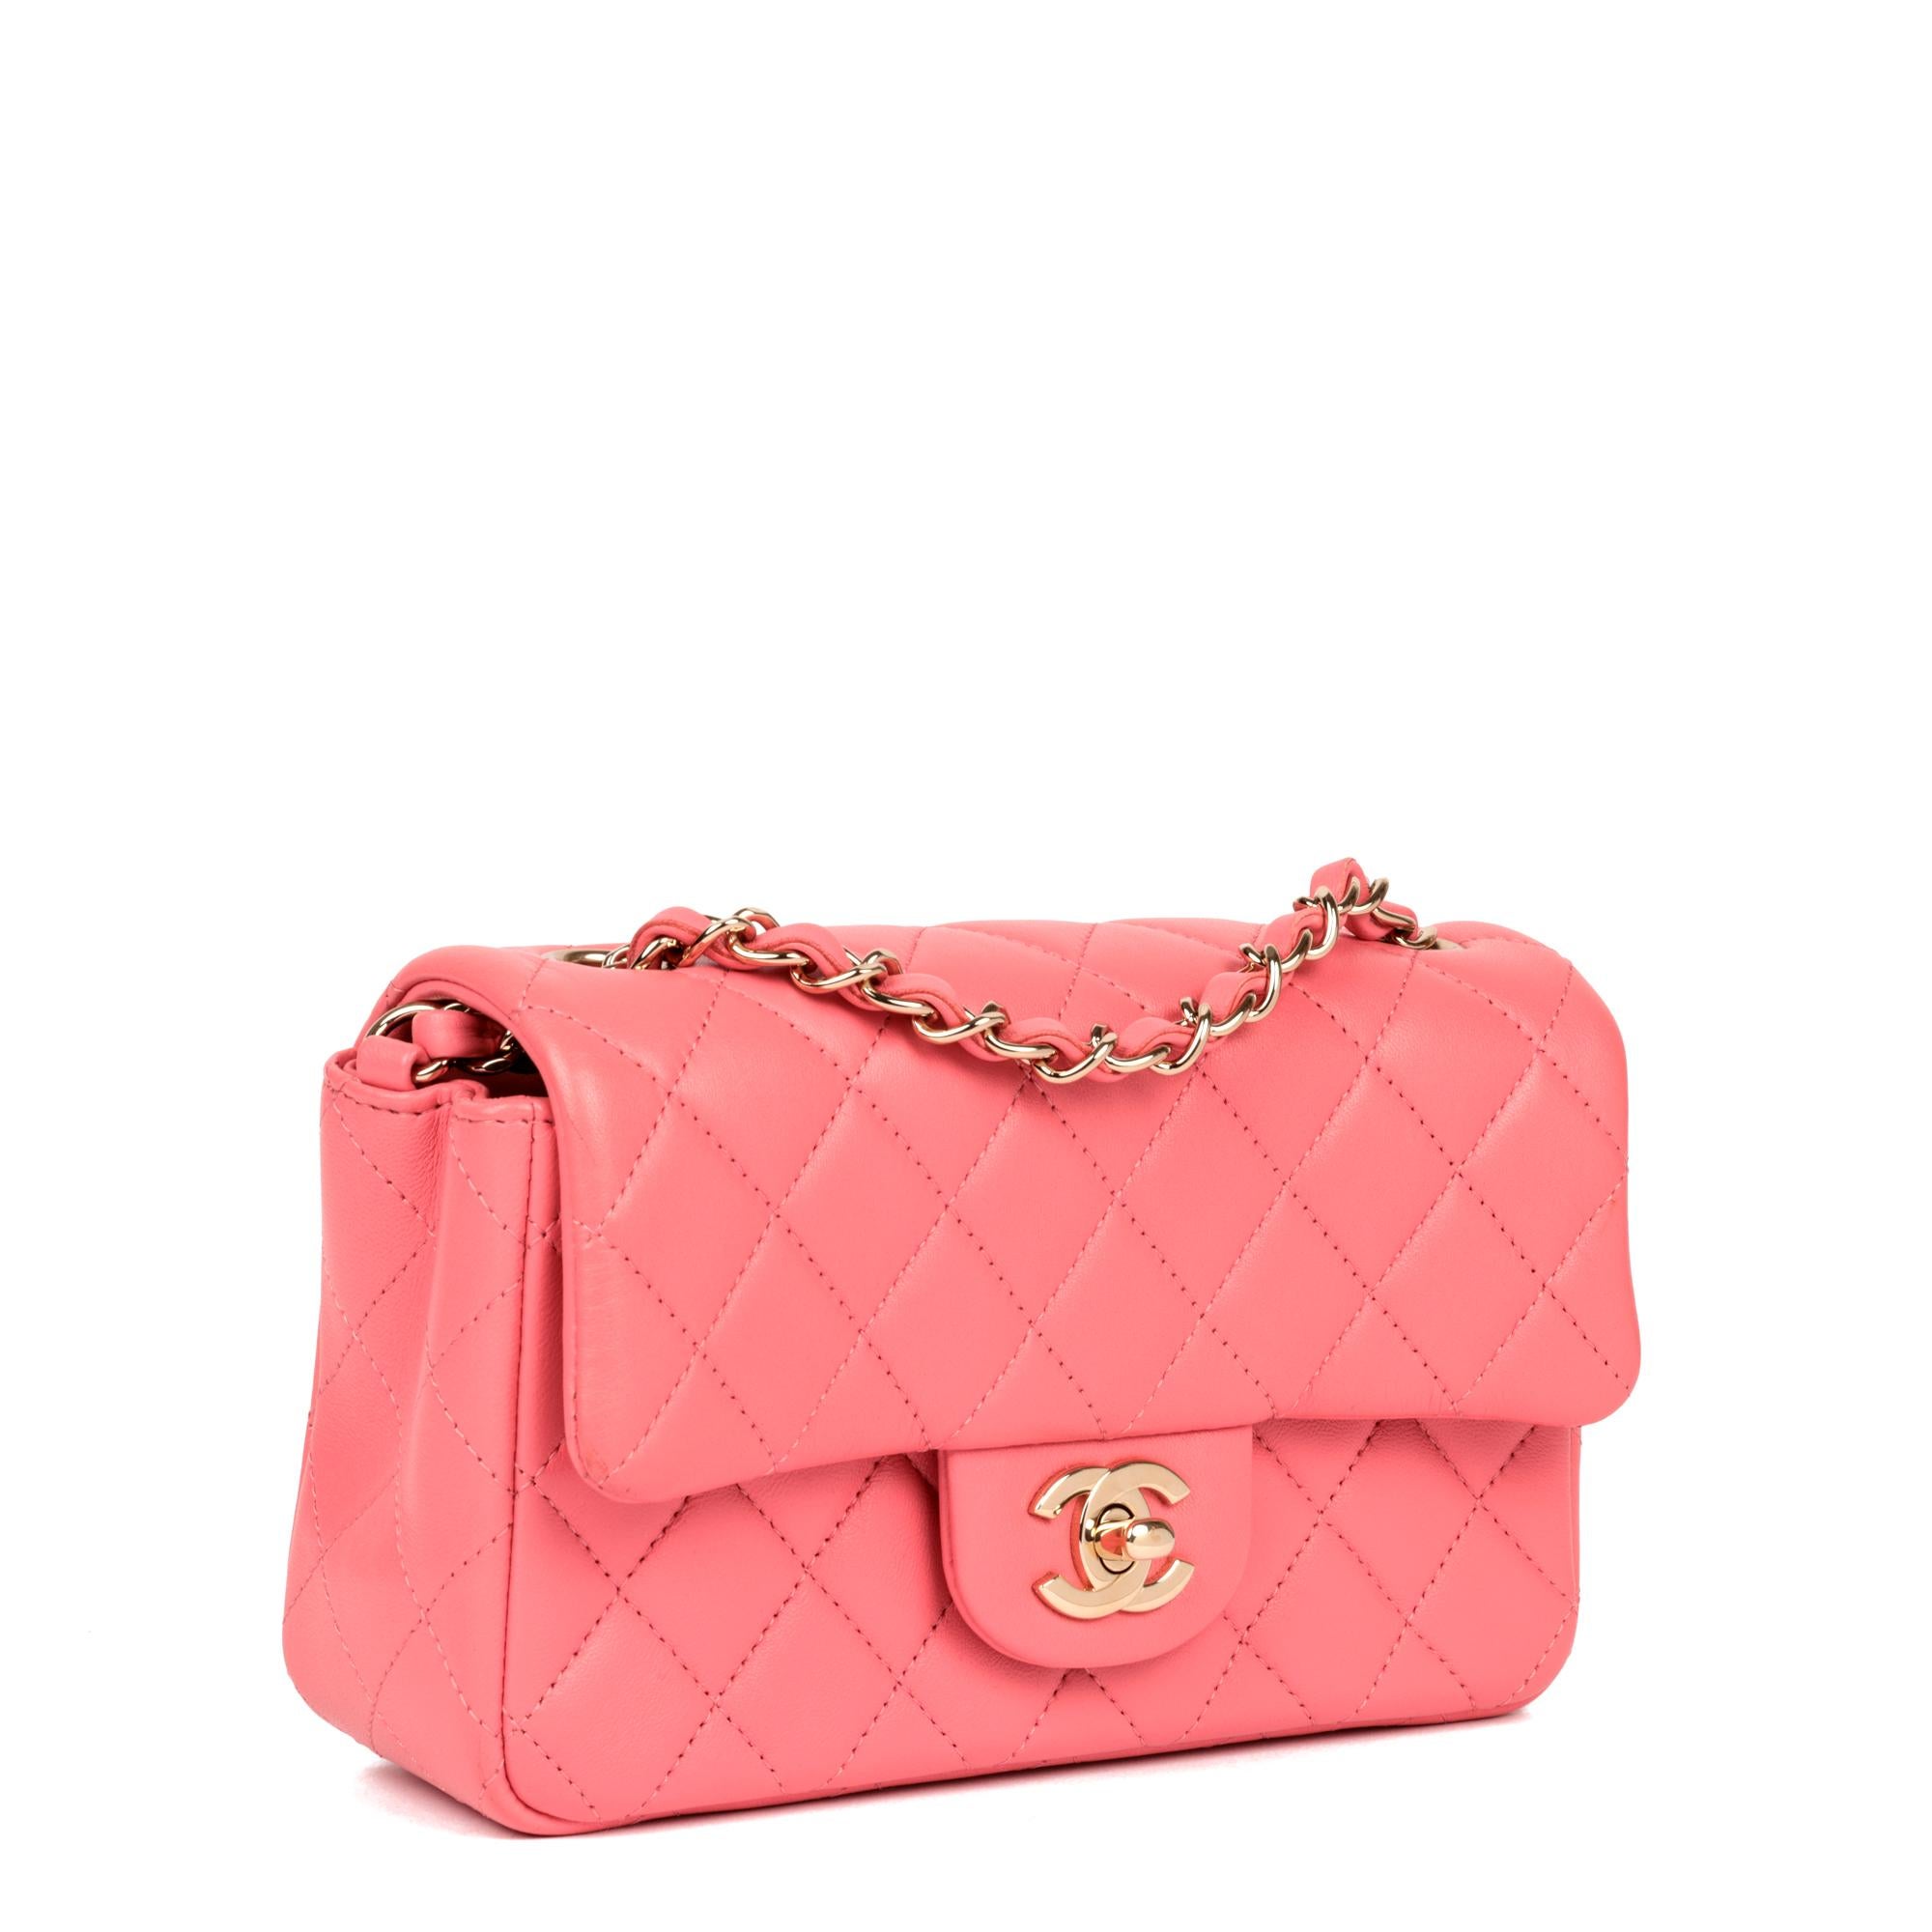 Chanel Pink Quilted Lambskin Rectangular Mini Flap Bag

CONDITION NOTES
The exterior is exceptional condition with no signs of use.
The interior is in exceptional condition with no signs of use.
The hardware is in exceptional condition with no signs